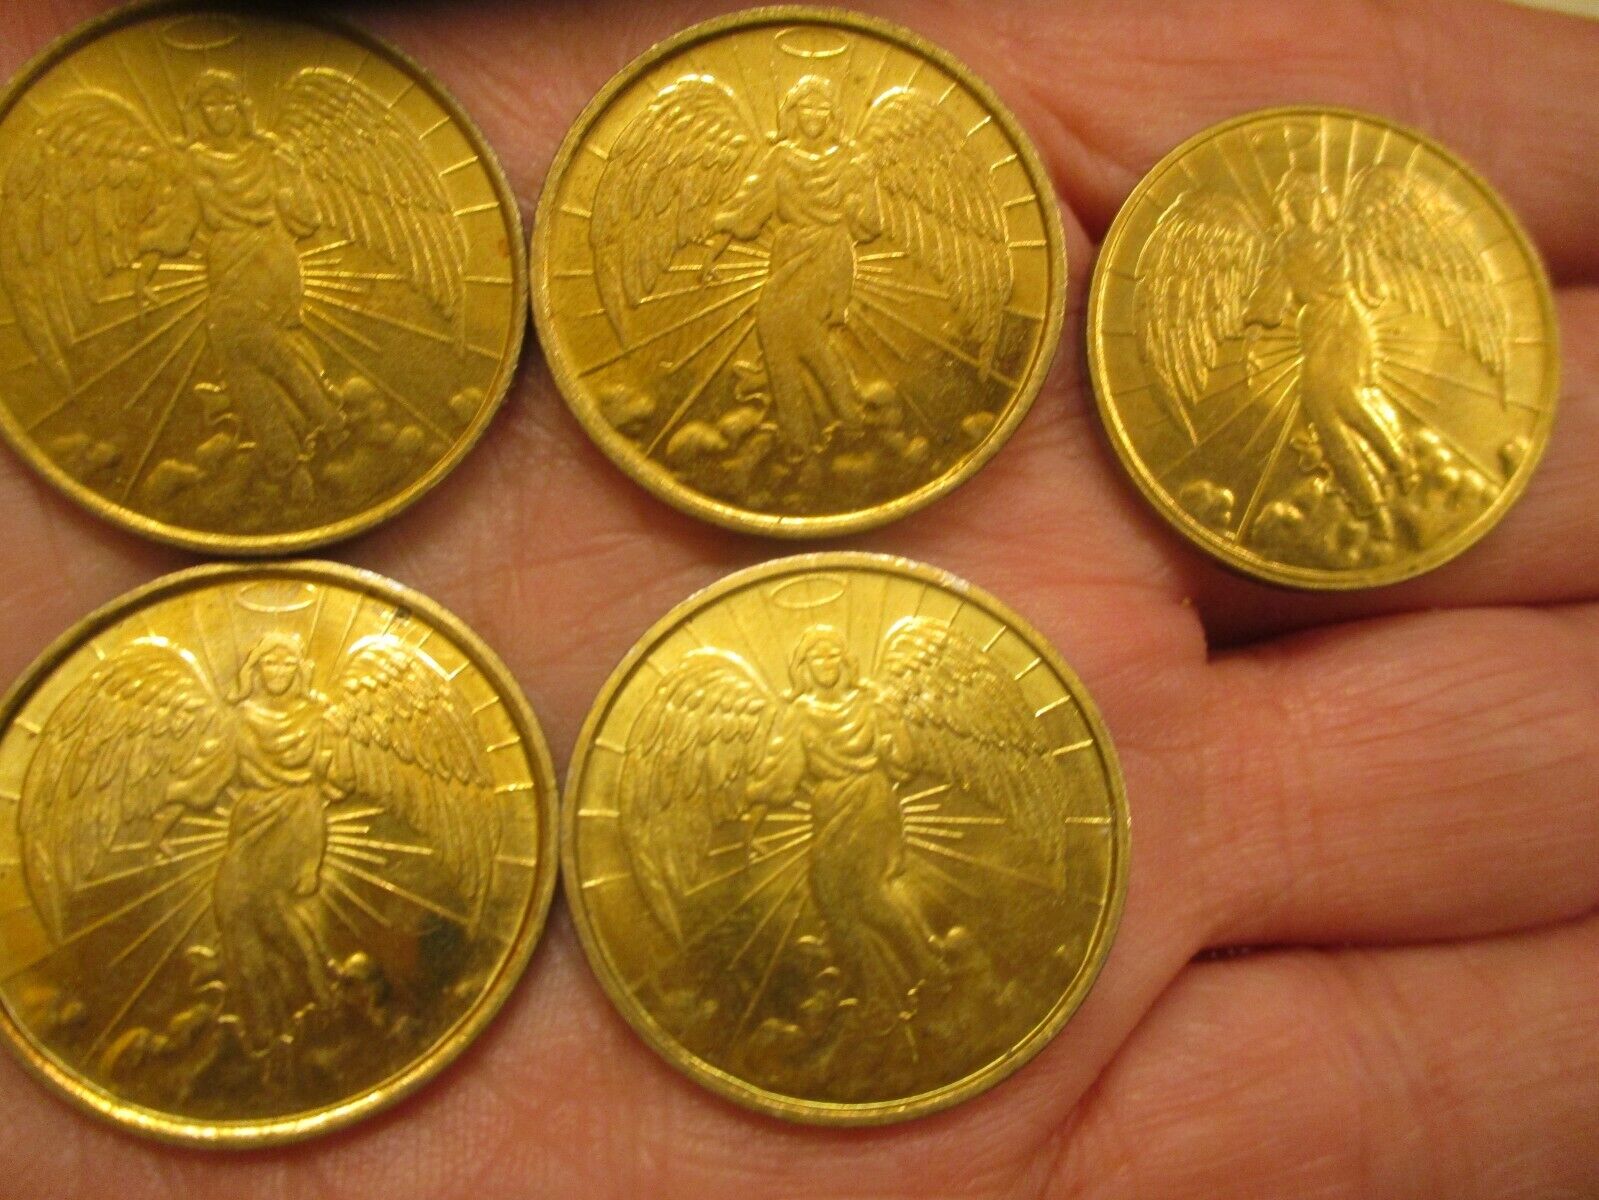 LOT OF 10 VINTAGE RELIGIOUS GOLD ANGEL COIN SALE SAVE $7